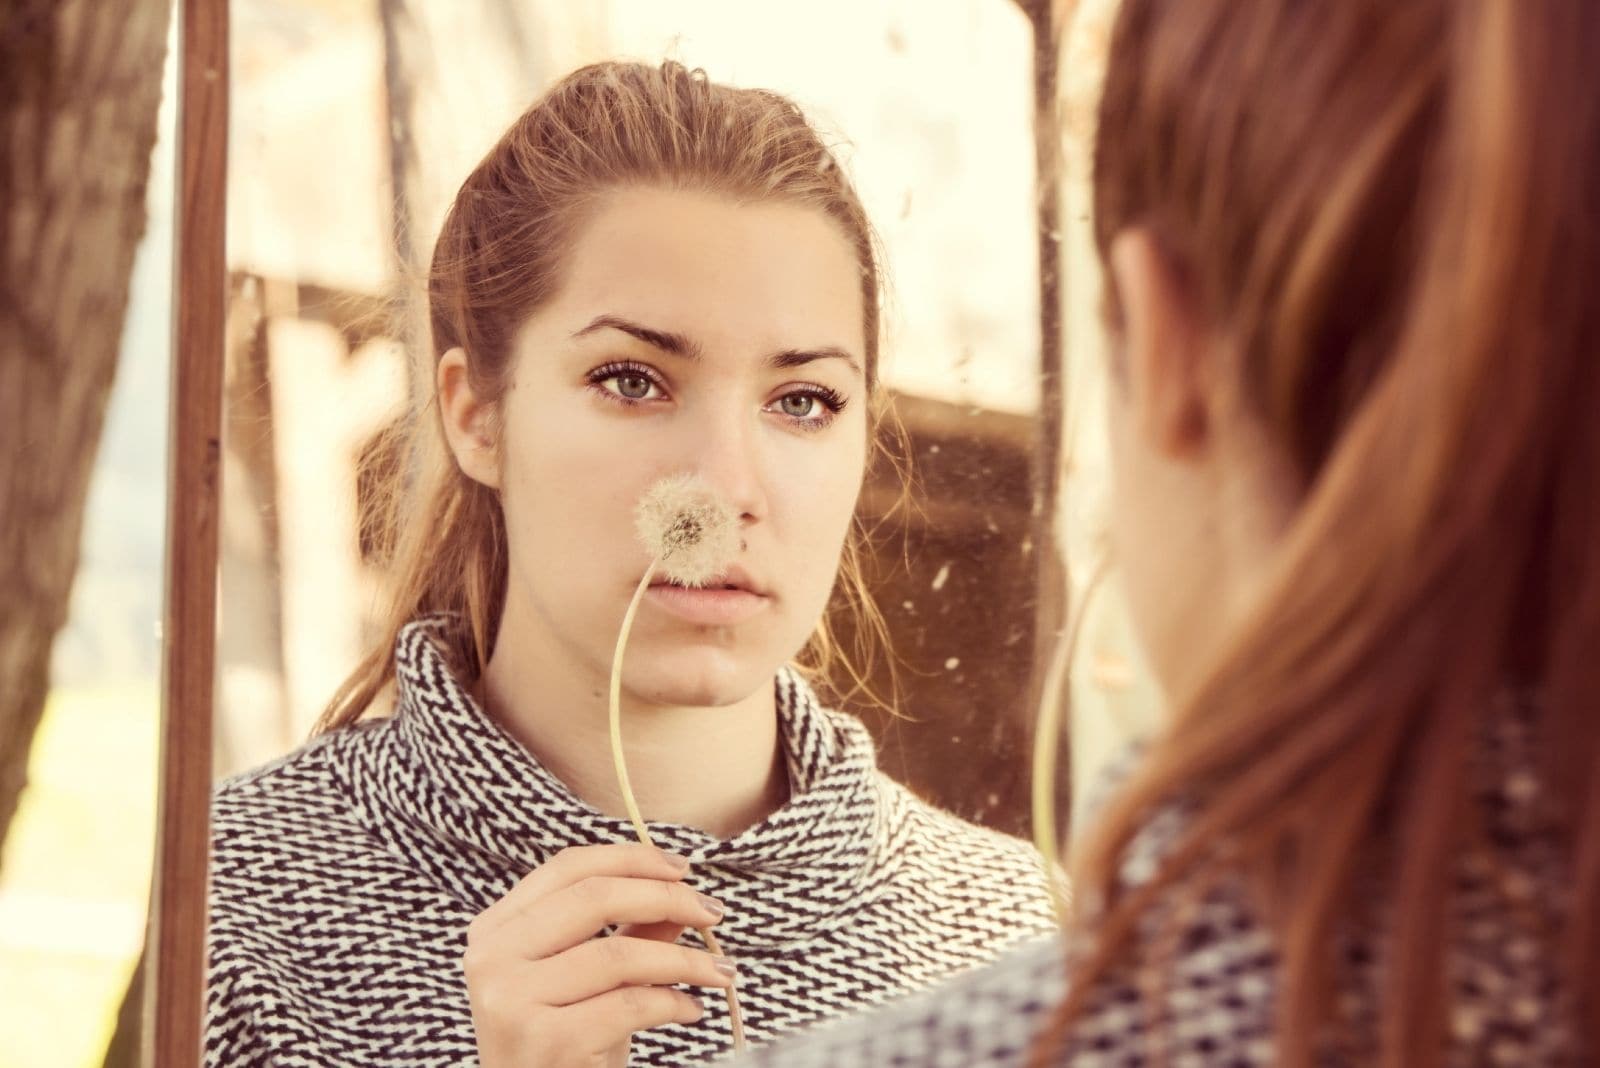 pensive woman holding a dandelion looking at herself at the mirror